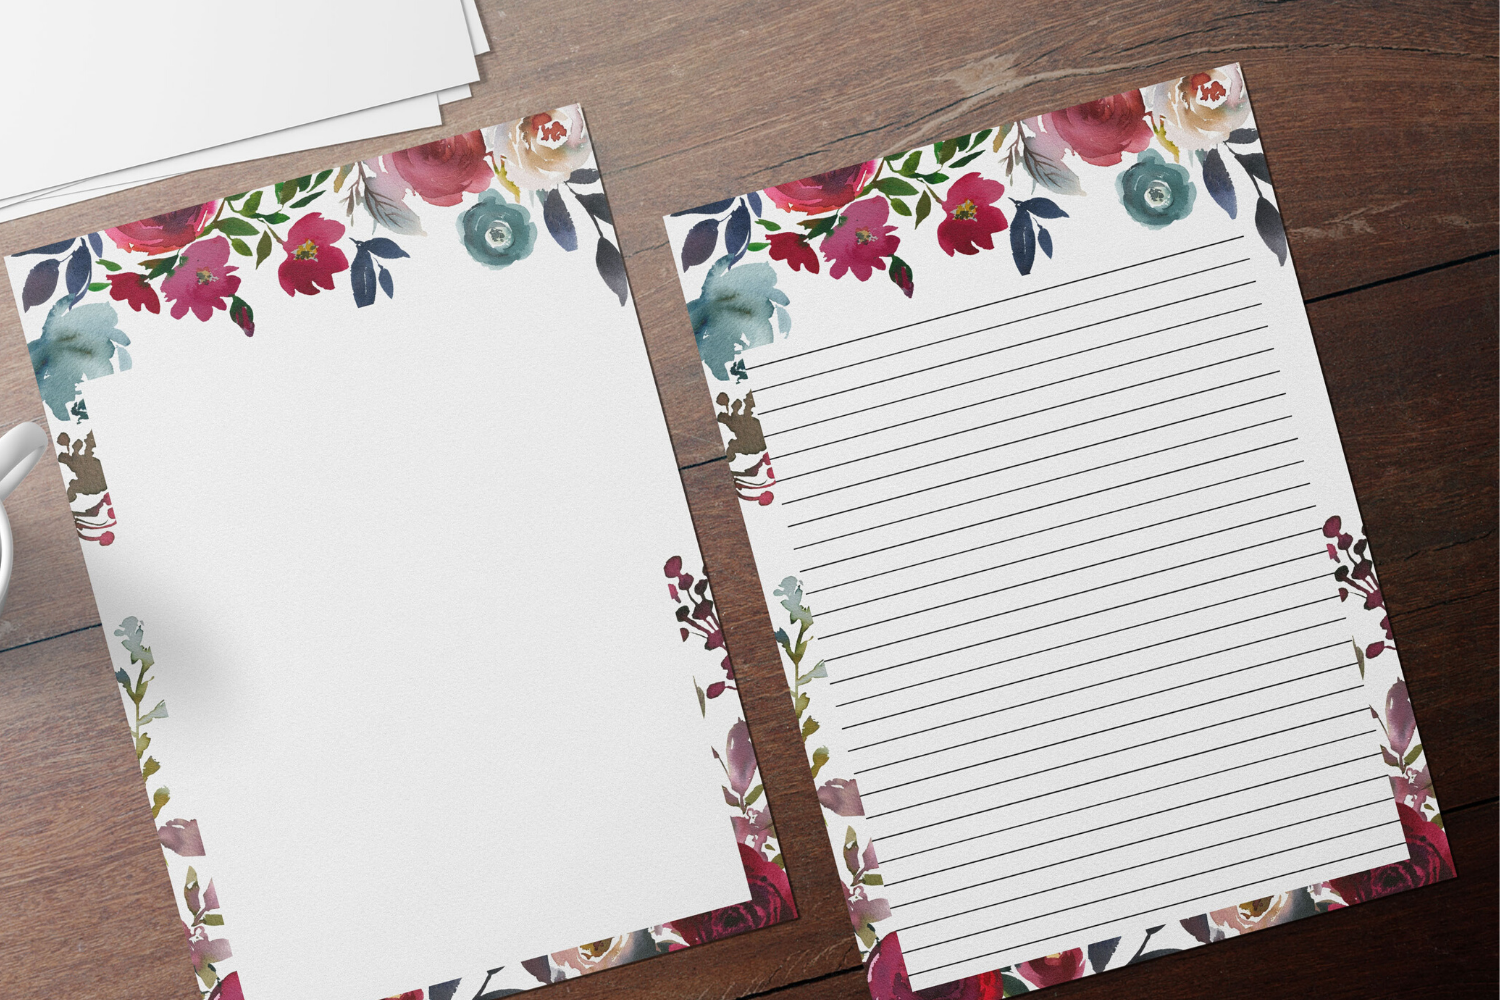 printable stationery floral